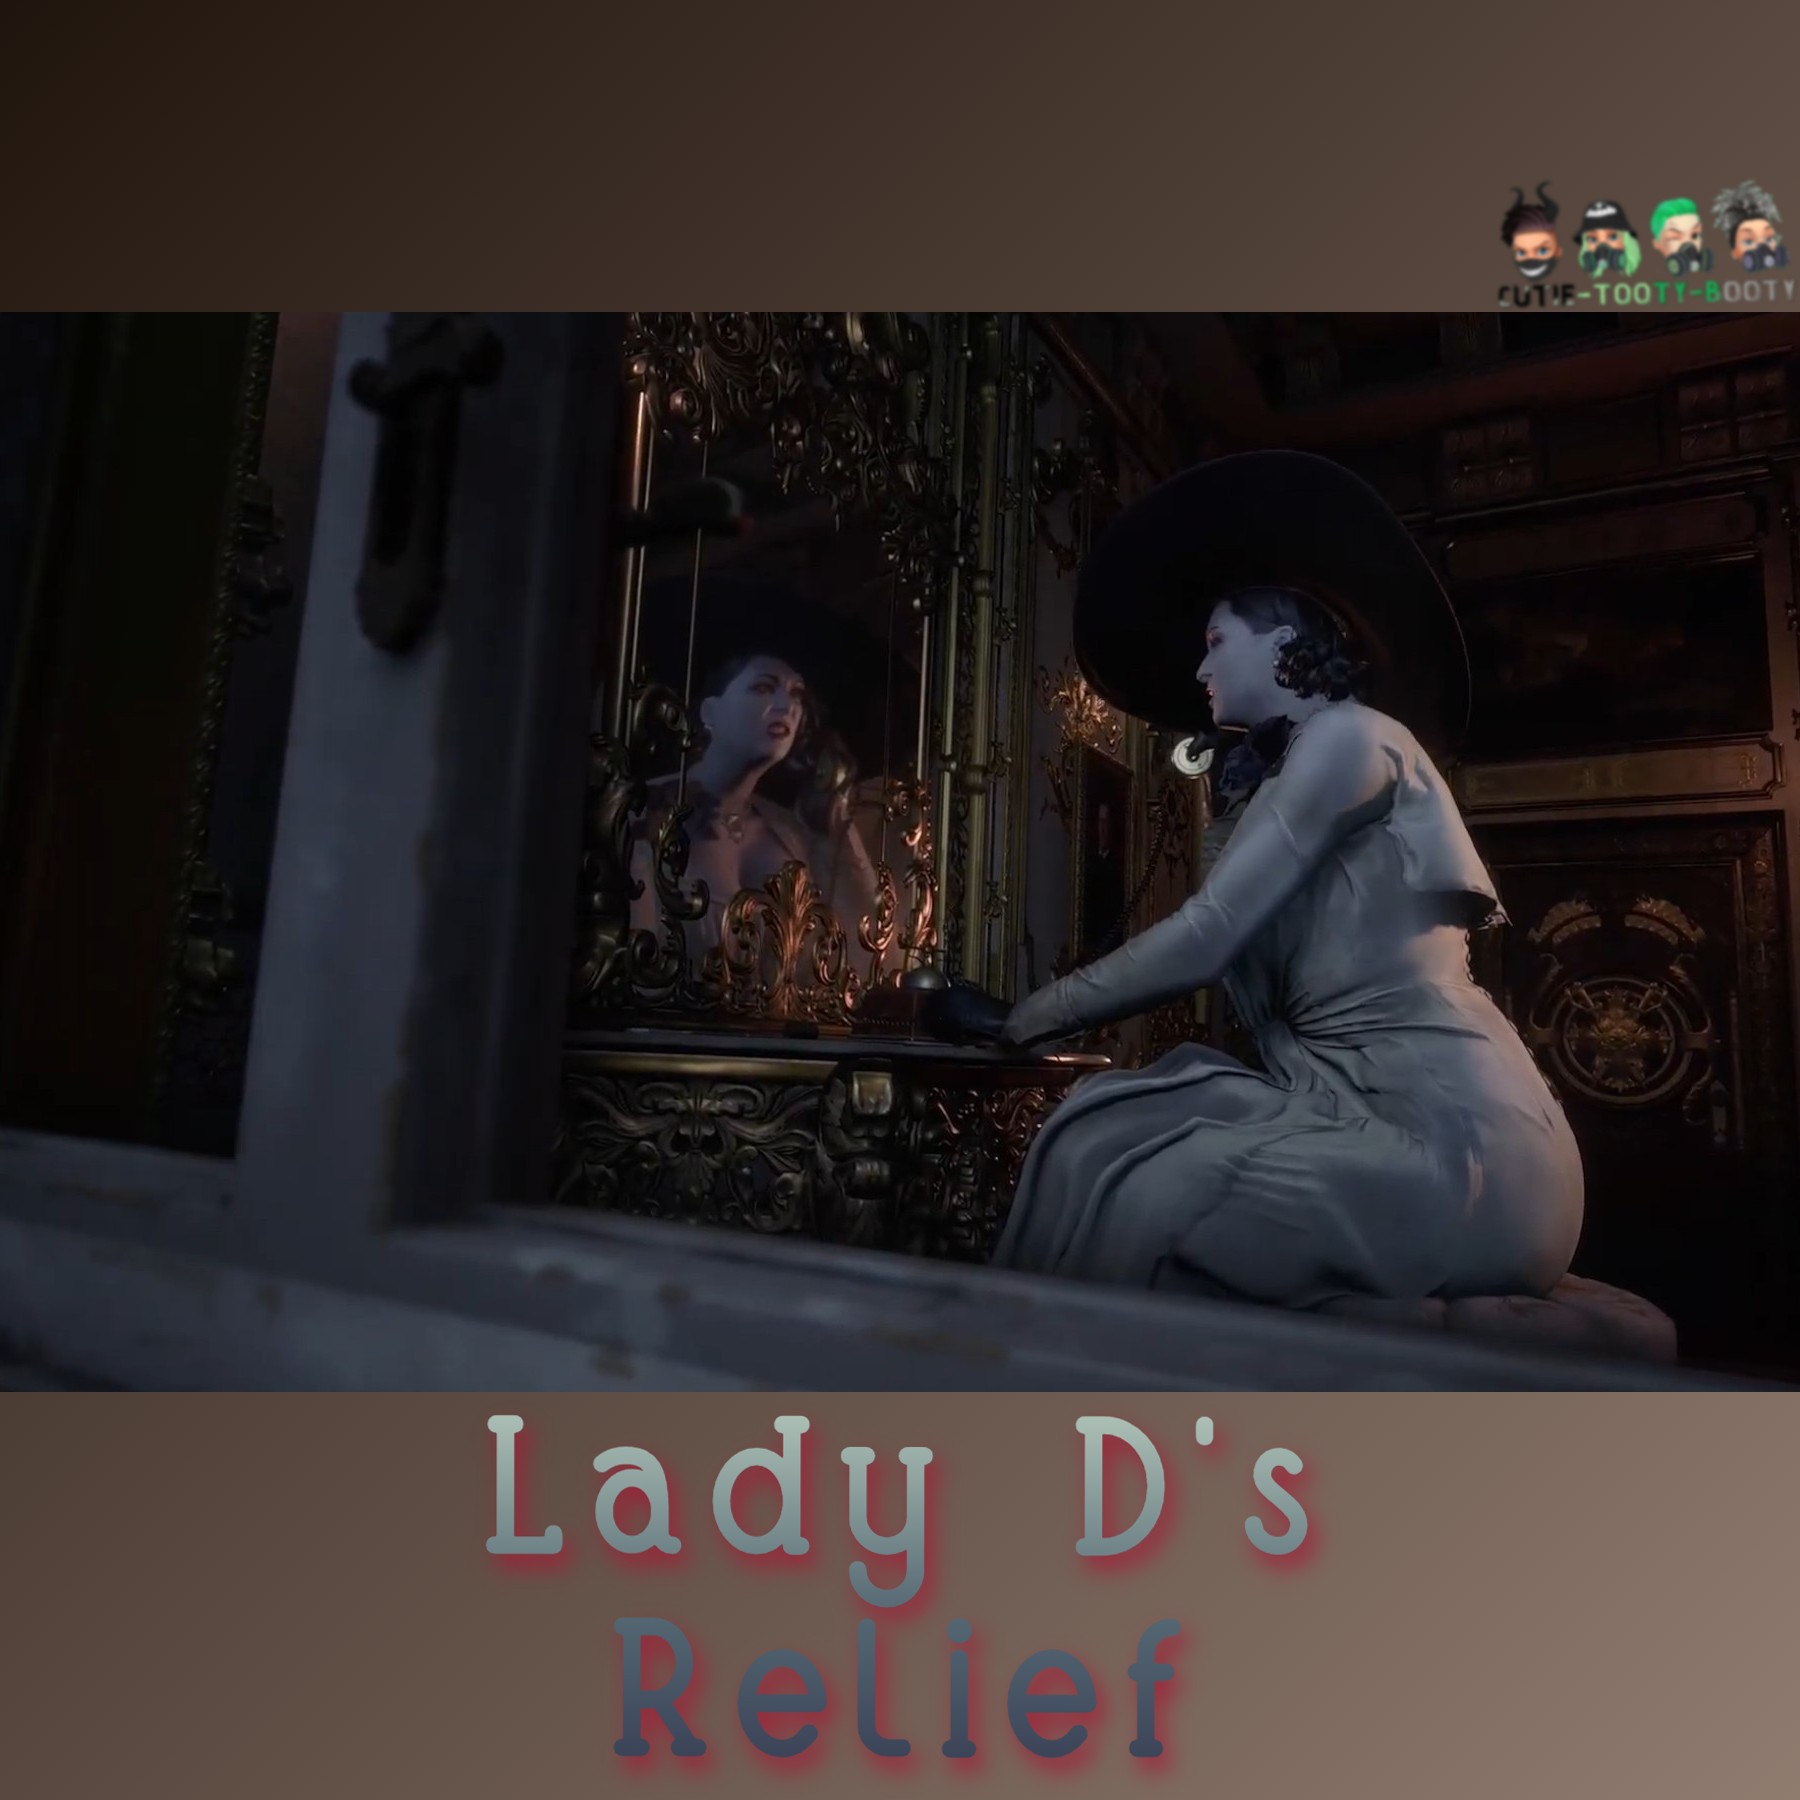 Lady D's Release